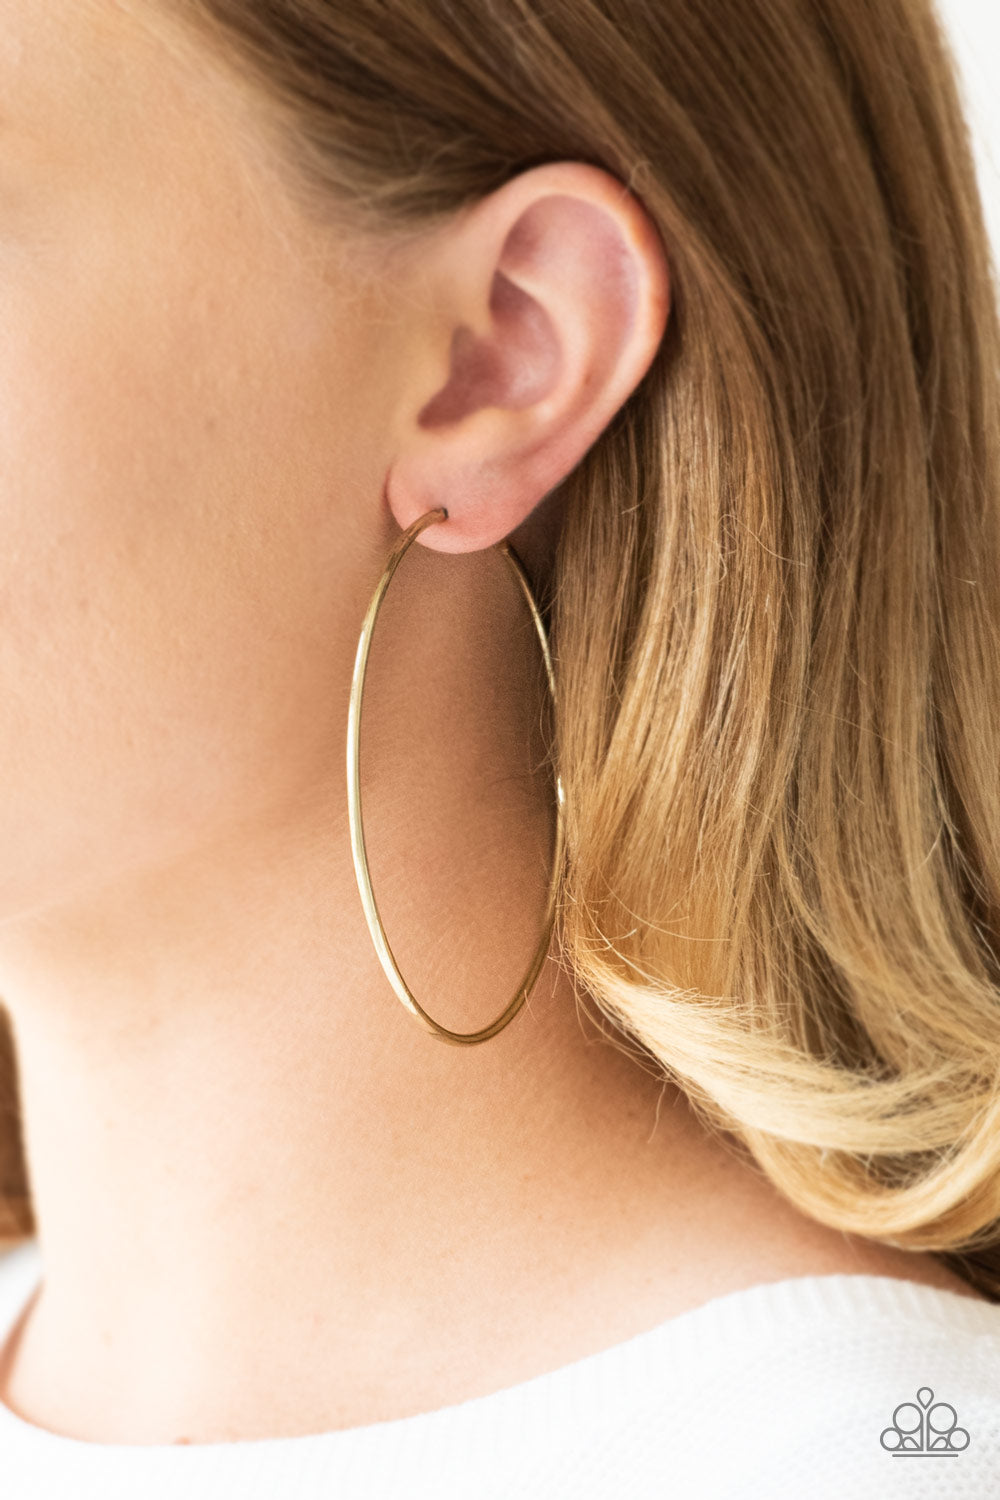 A skinny ribbon of brass curls into a bold hoop for a dramatic look. Earring attaches to a standard post fitting. Hoop measures 3” in diameter. Sold as one pair of hoop earrings.